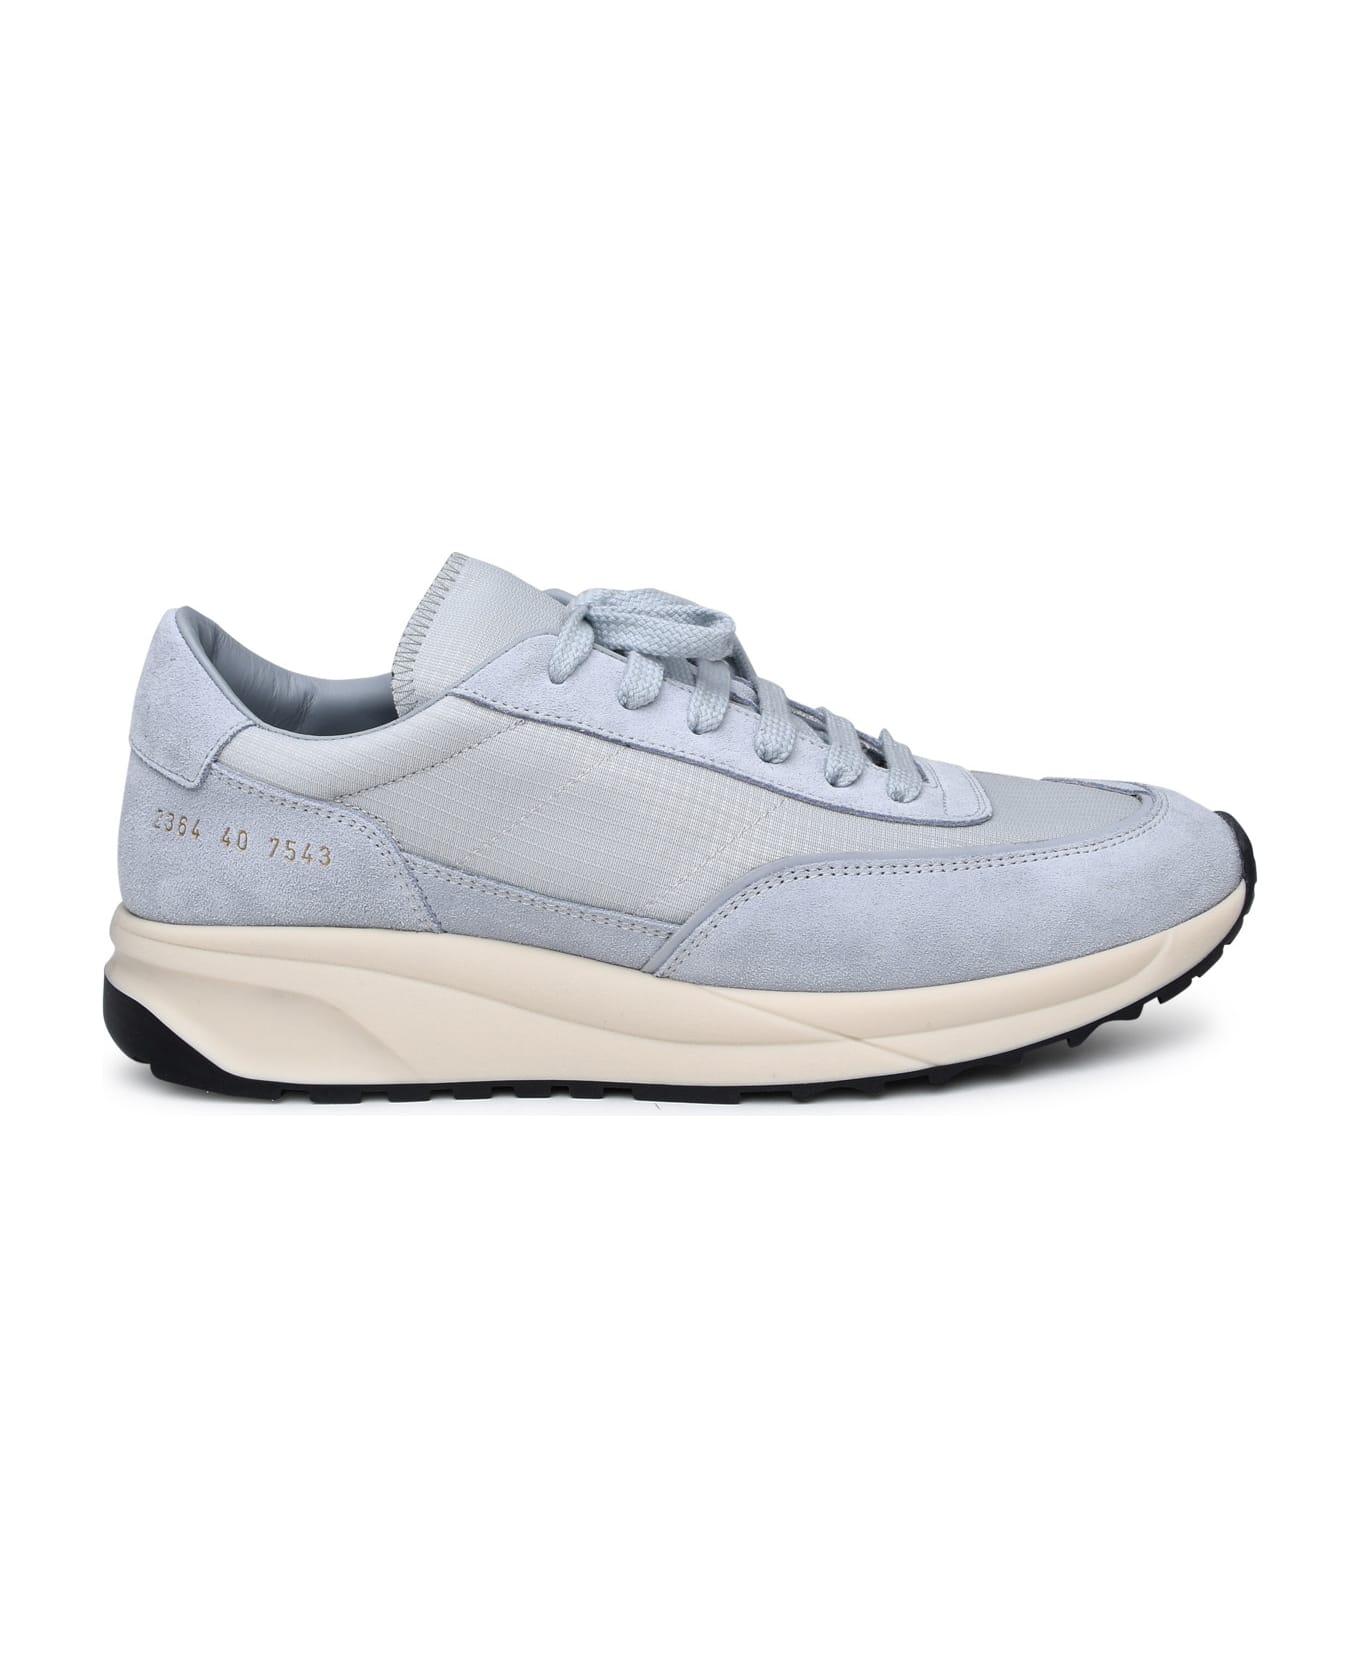 Common Projects Gray Suede Track Sneakers - Grey スニーカー